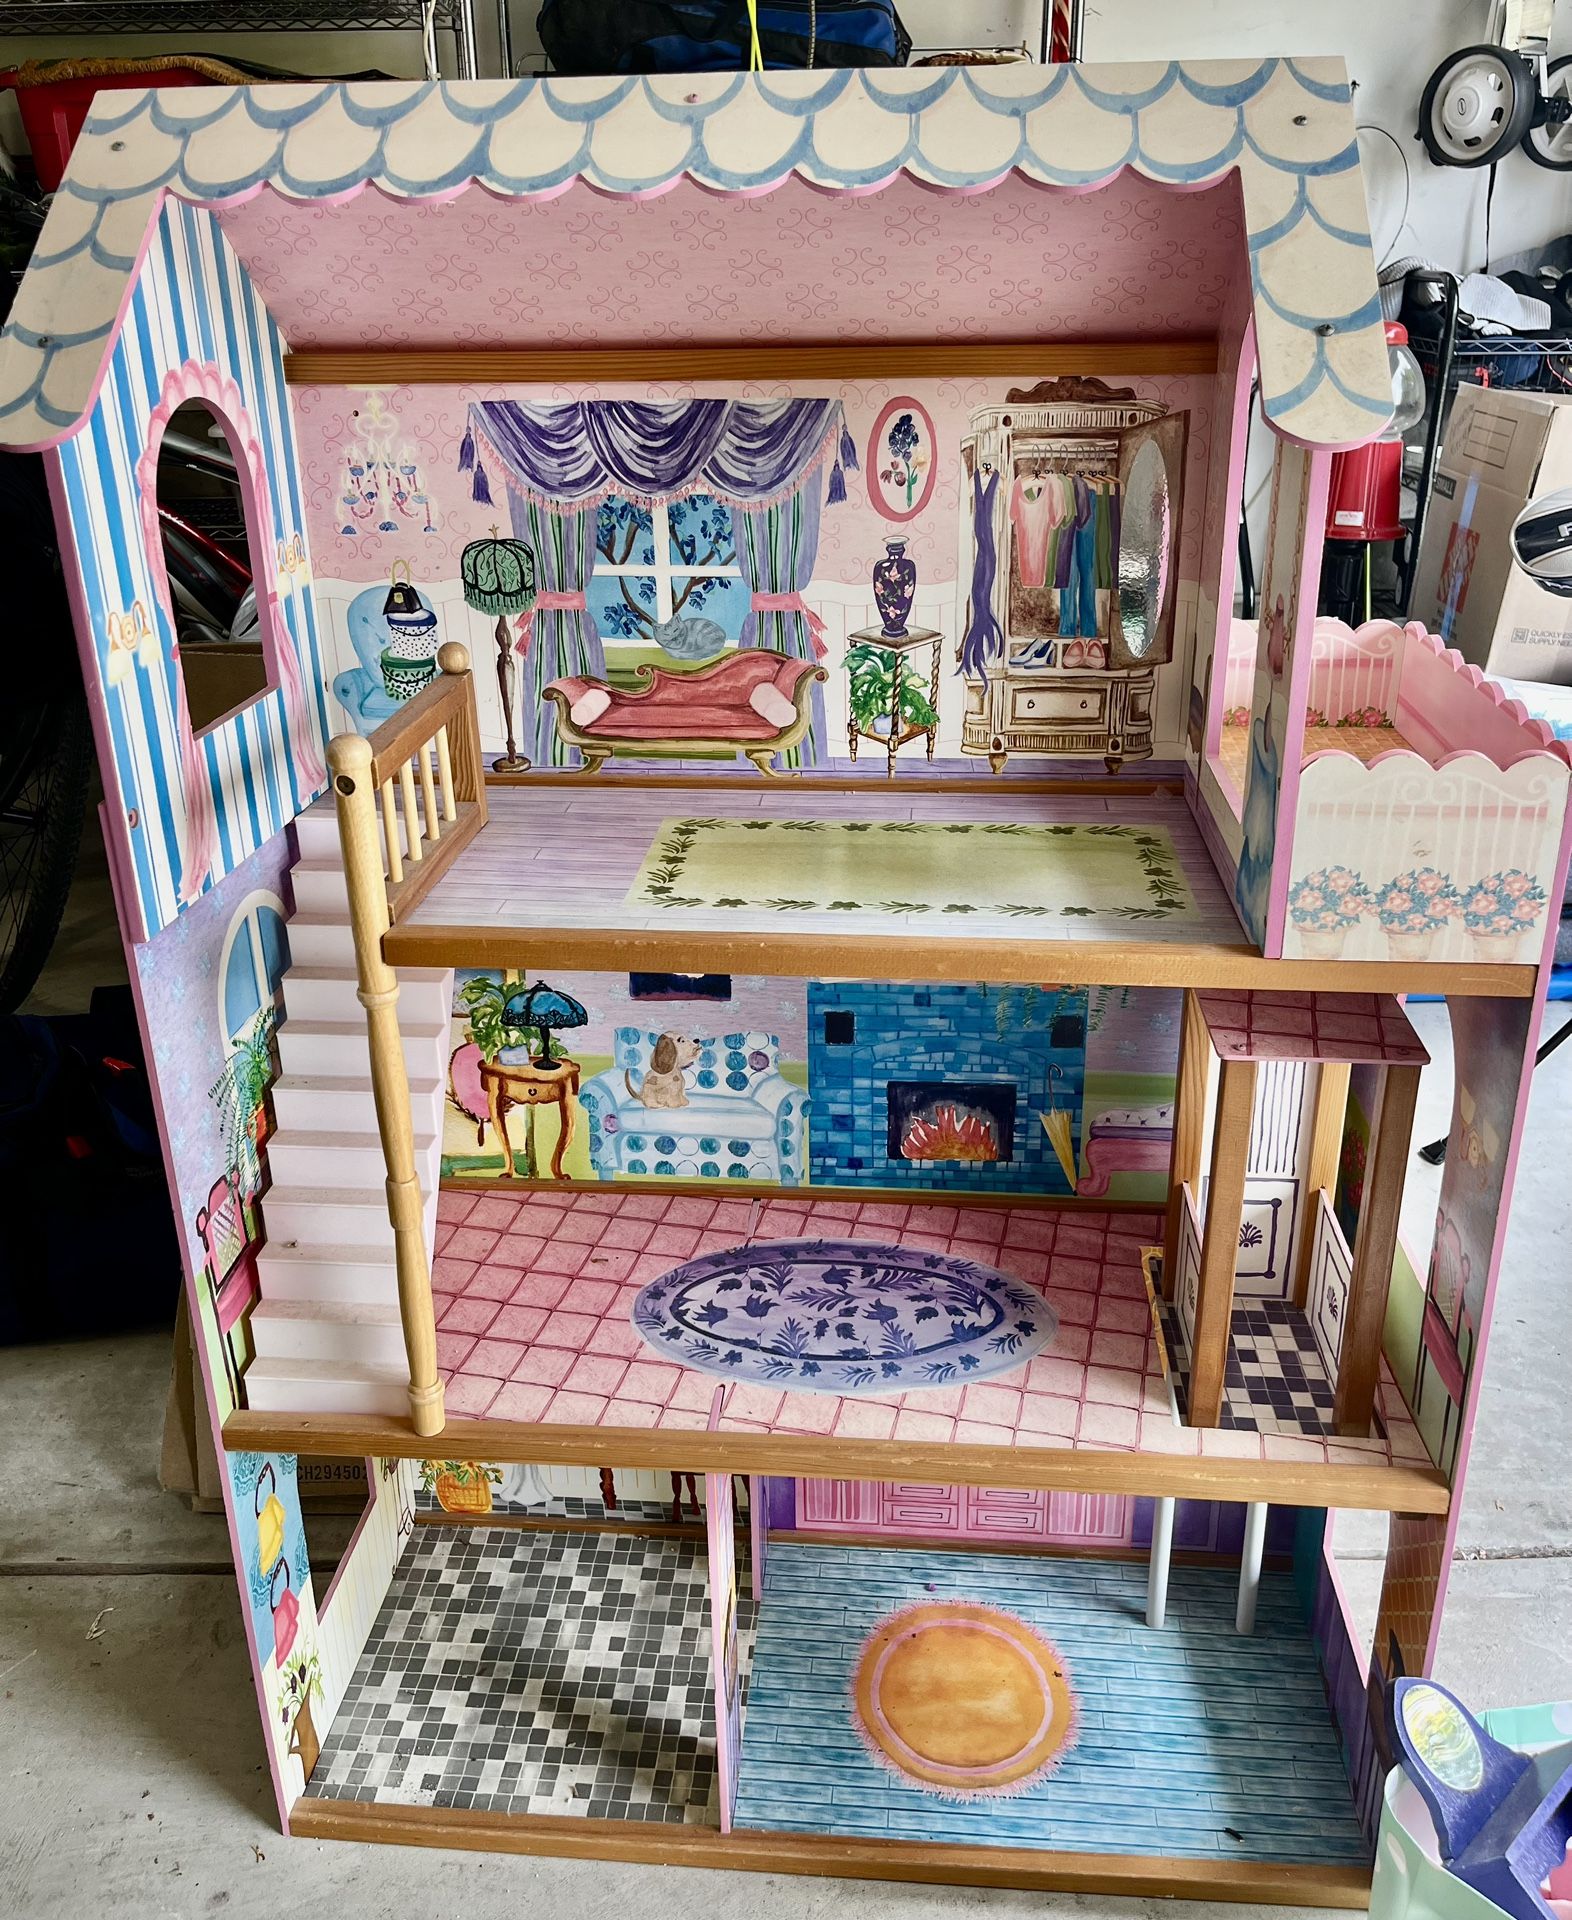  Doll House FREE